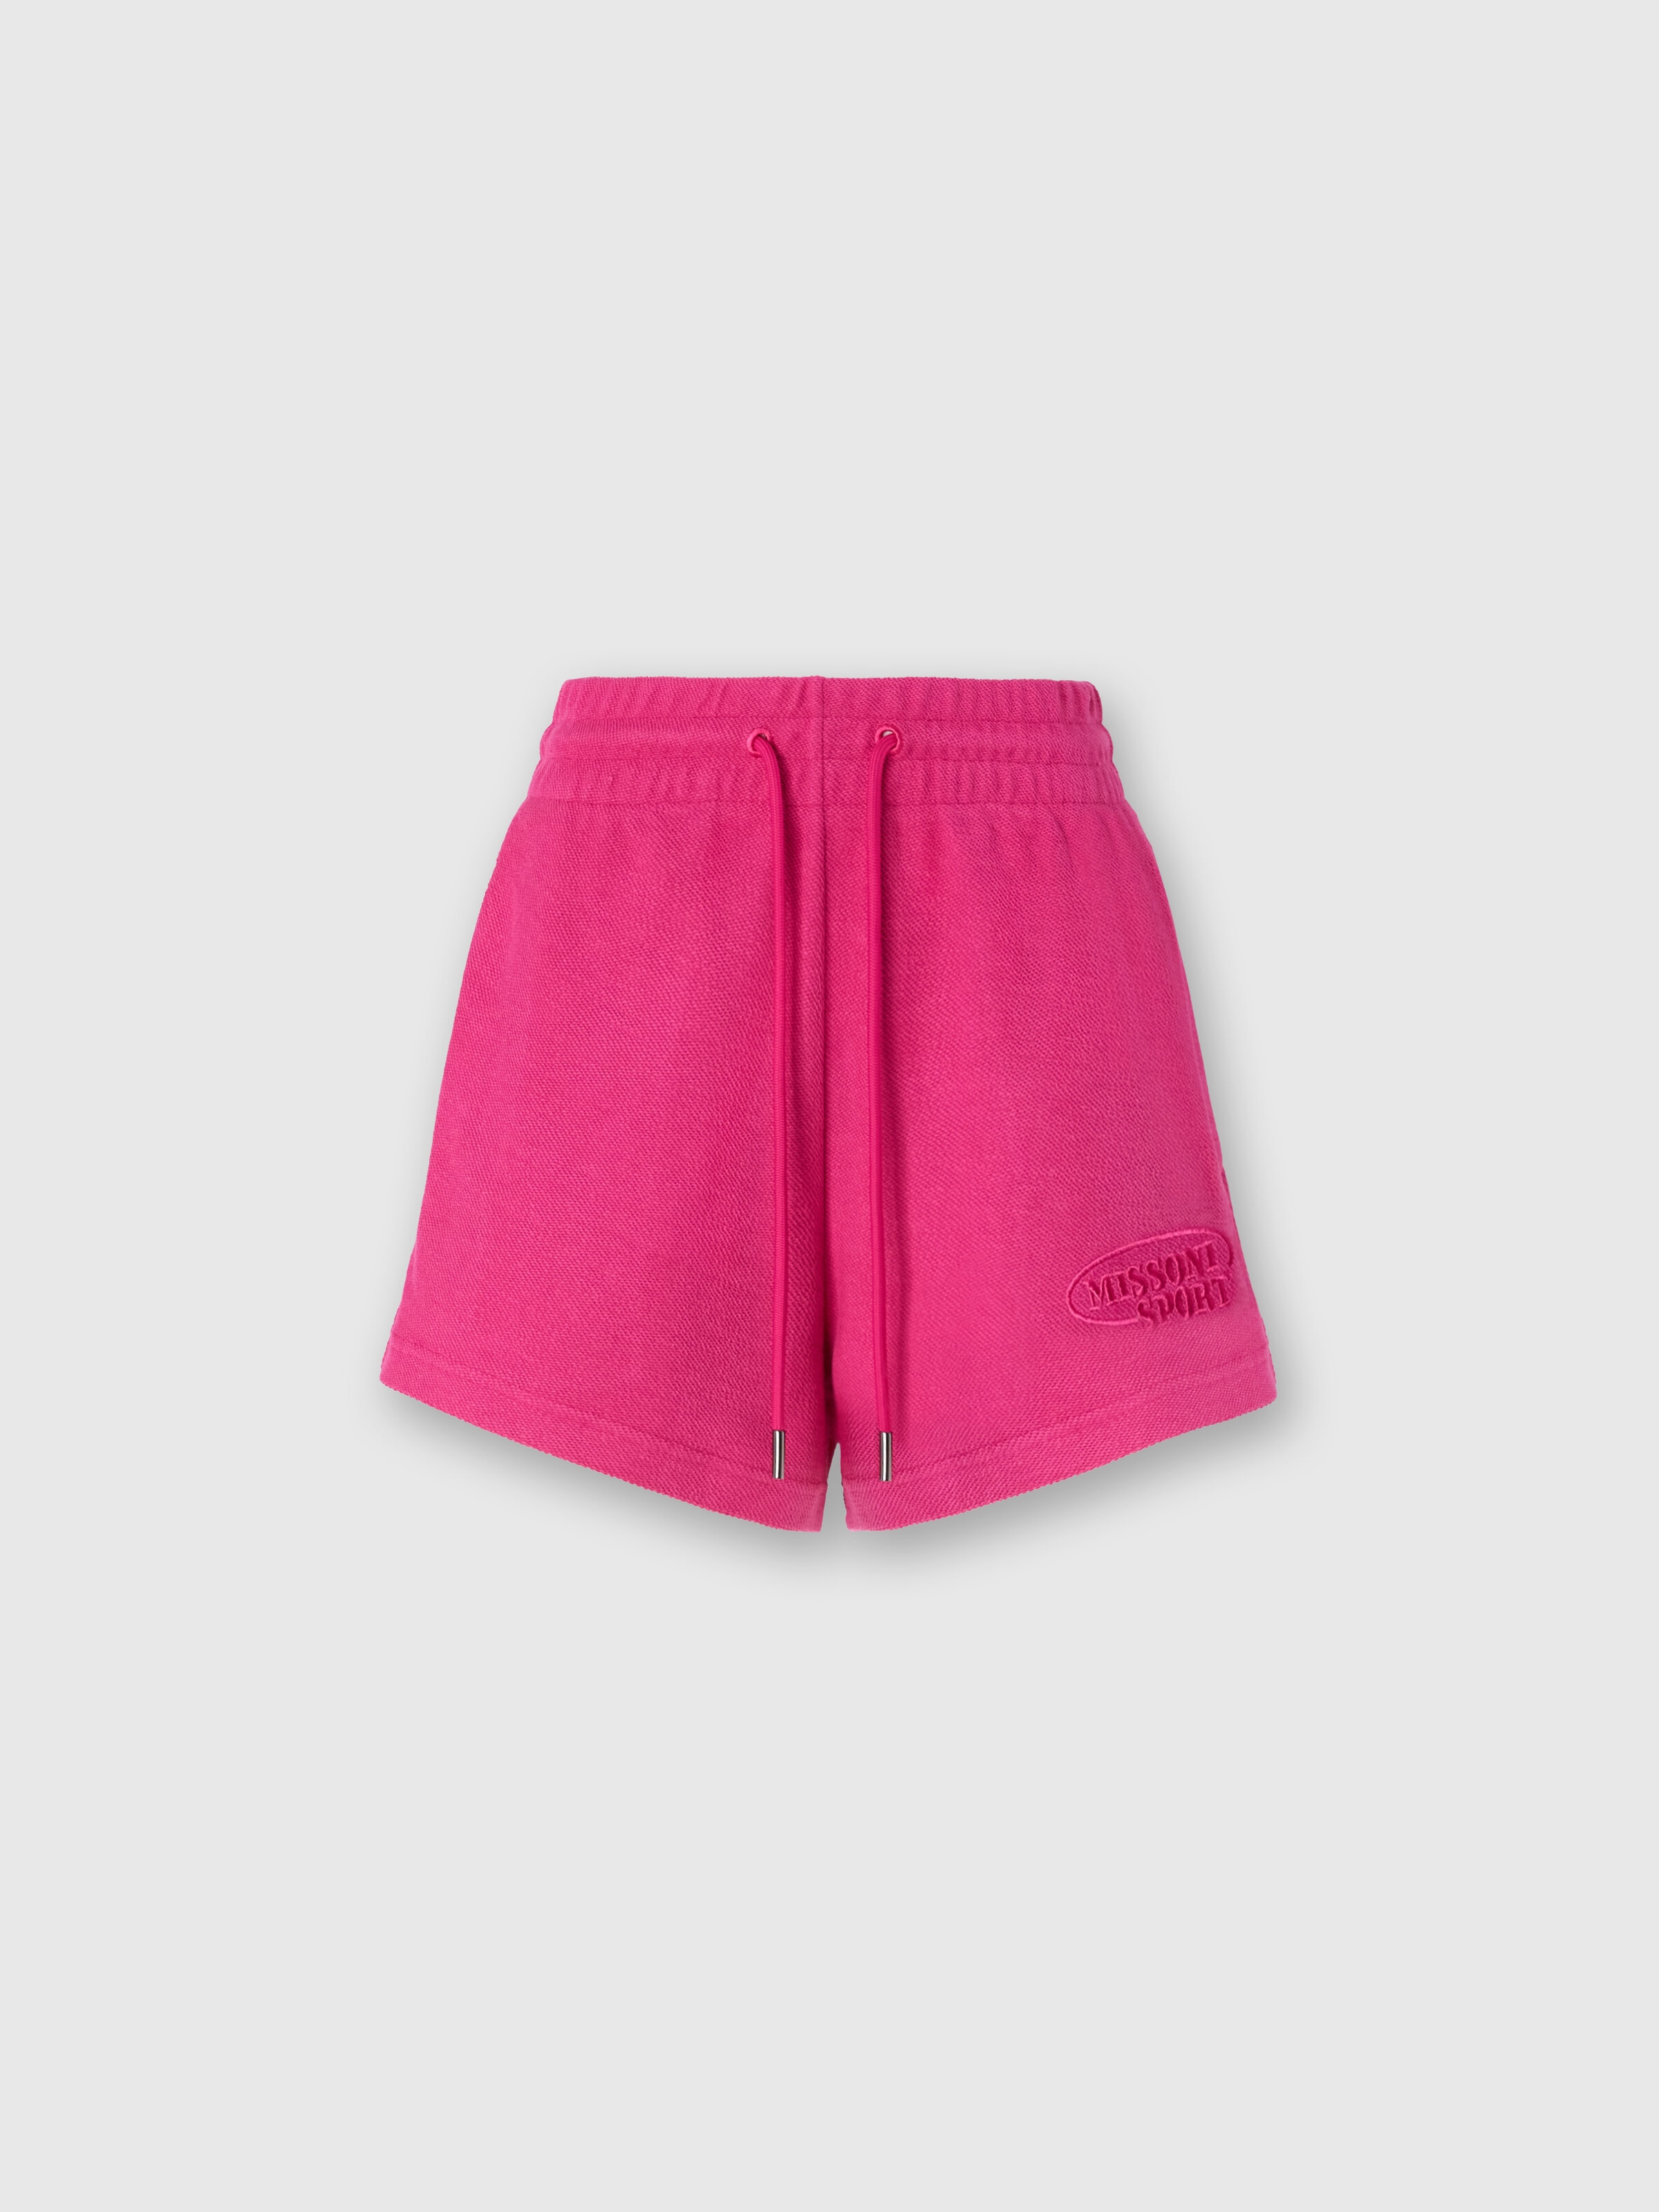 Shorts in brushed fleece with logo, Red  - 0